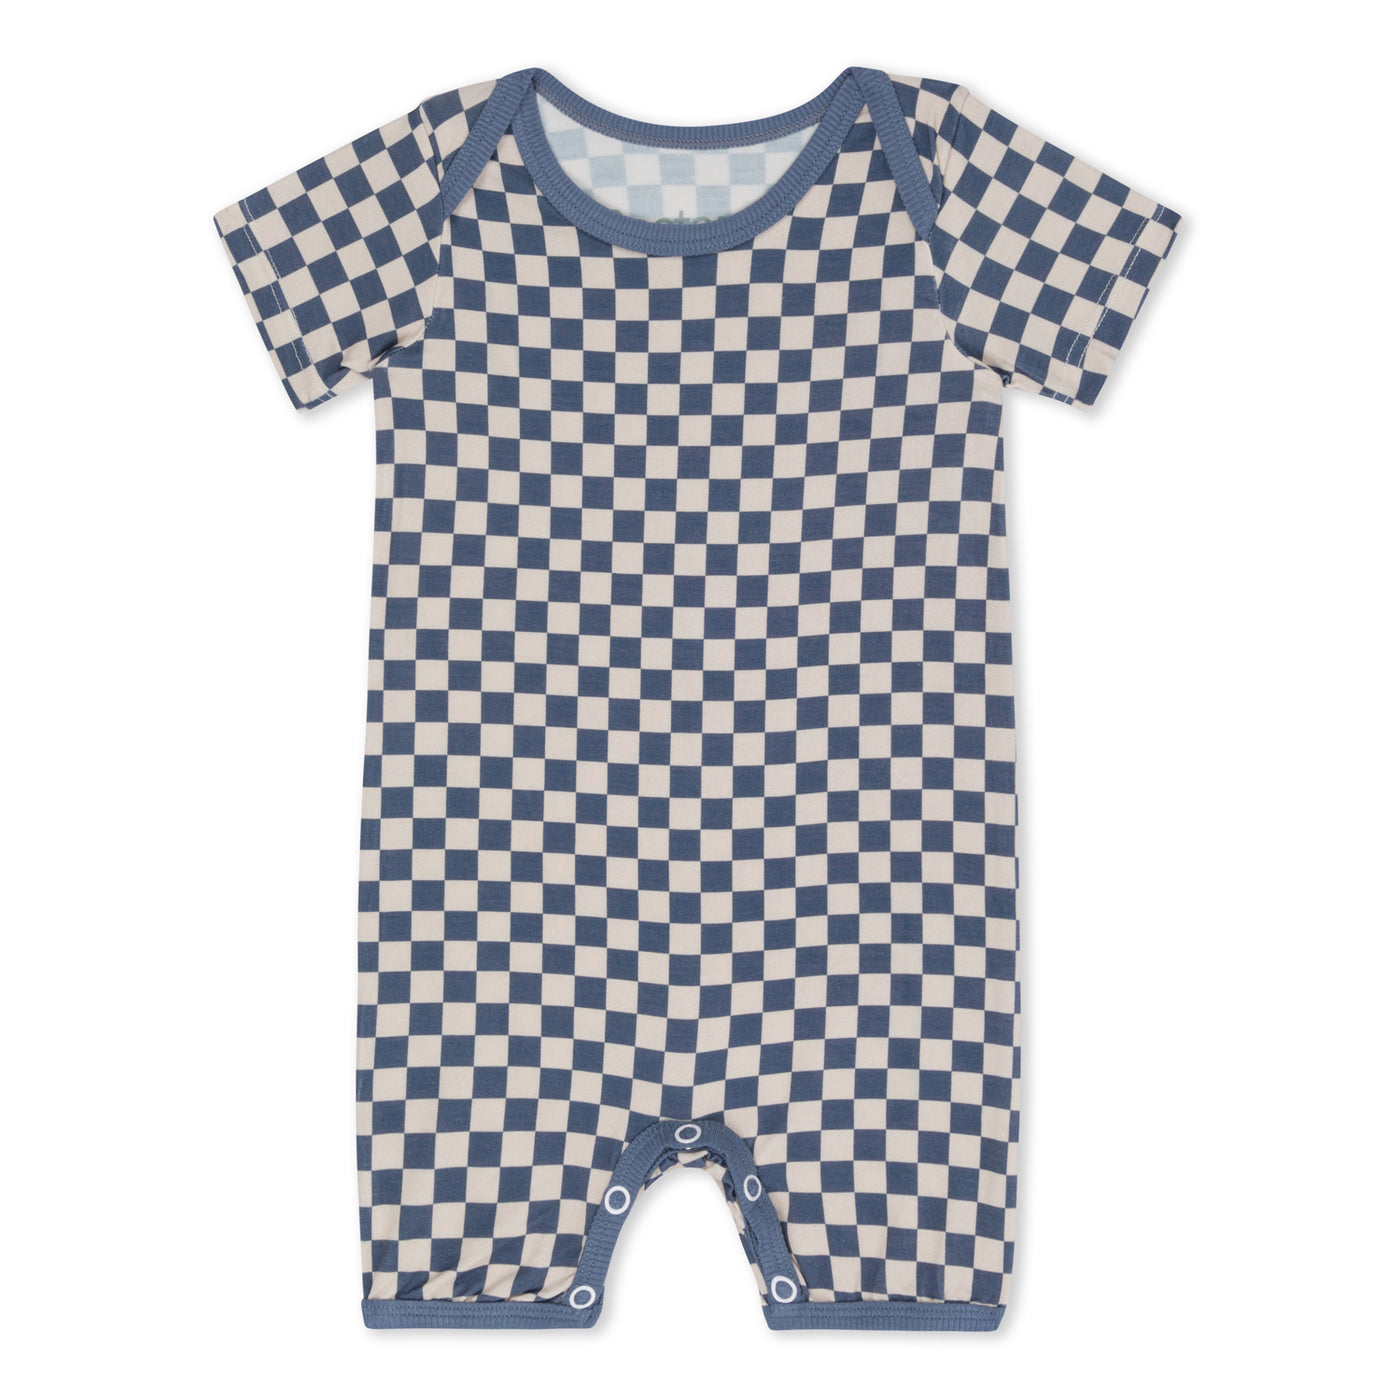 Checkers in Blue Shortall